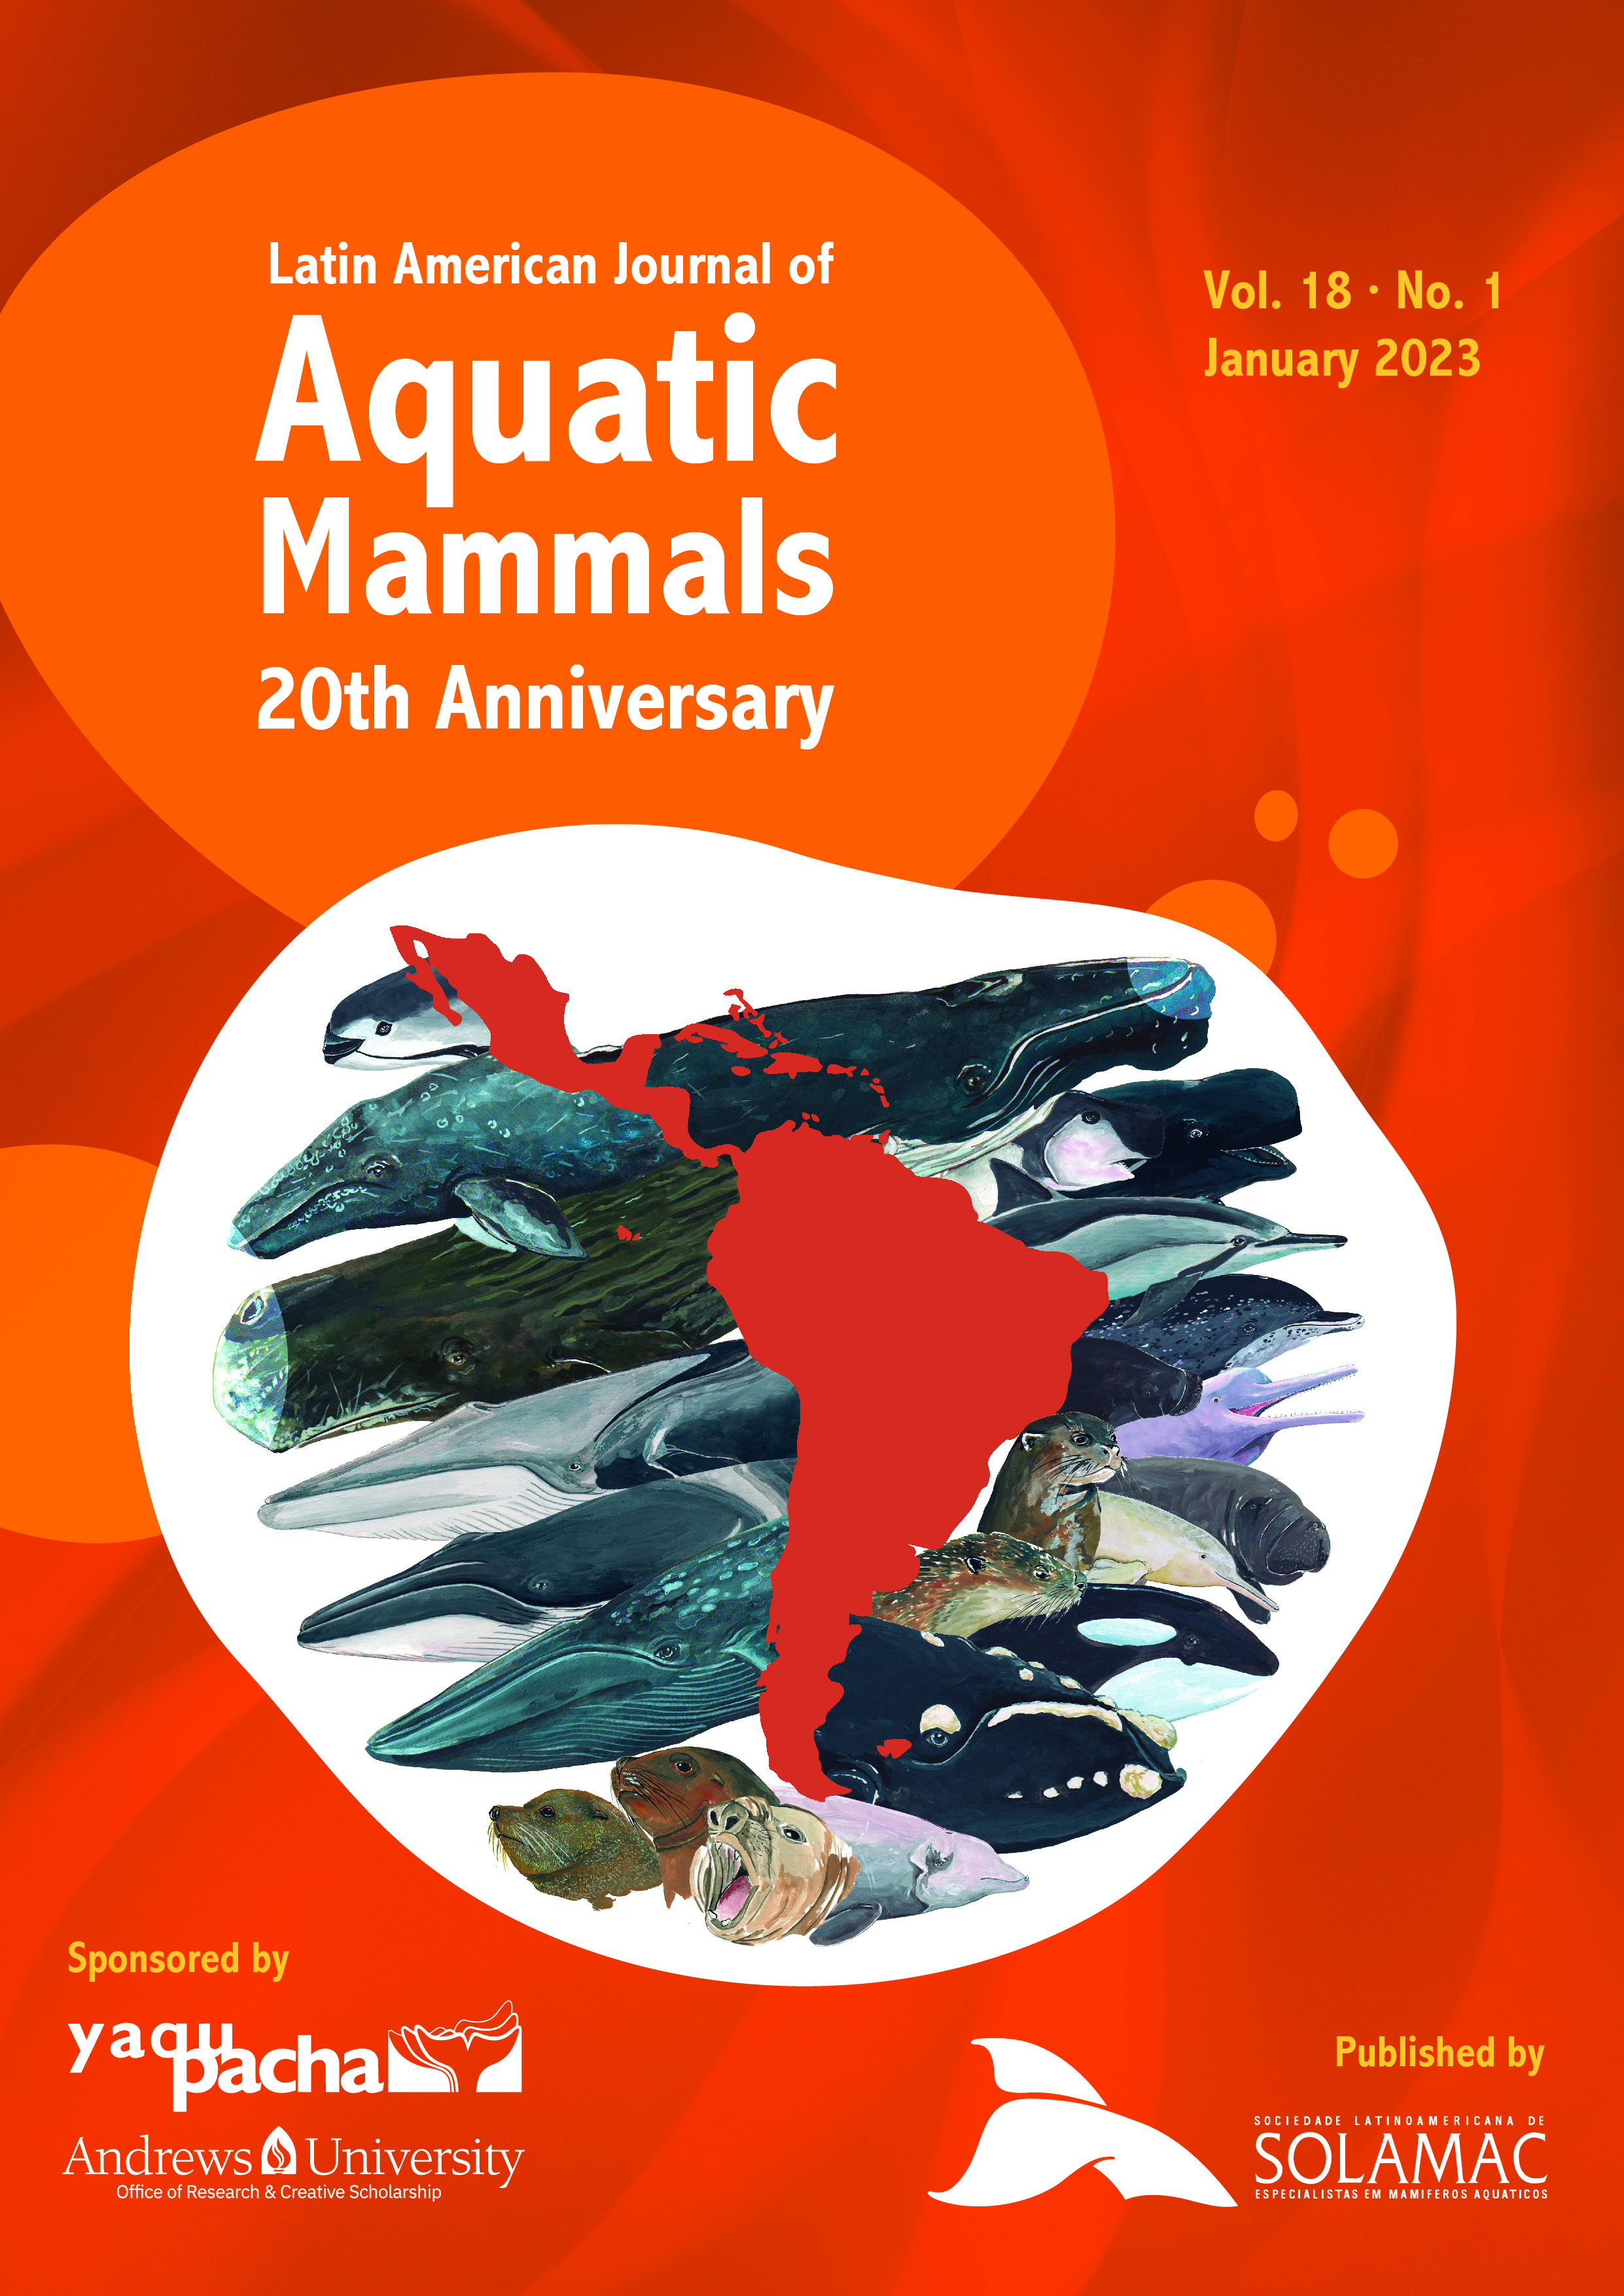 Cover of Vol. 18 No. 1 depicting aquatic mammals of Latin America with a map of the region superimposed. Art by Alexandre Huber